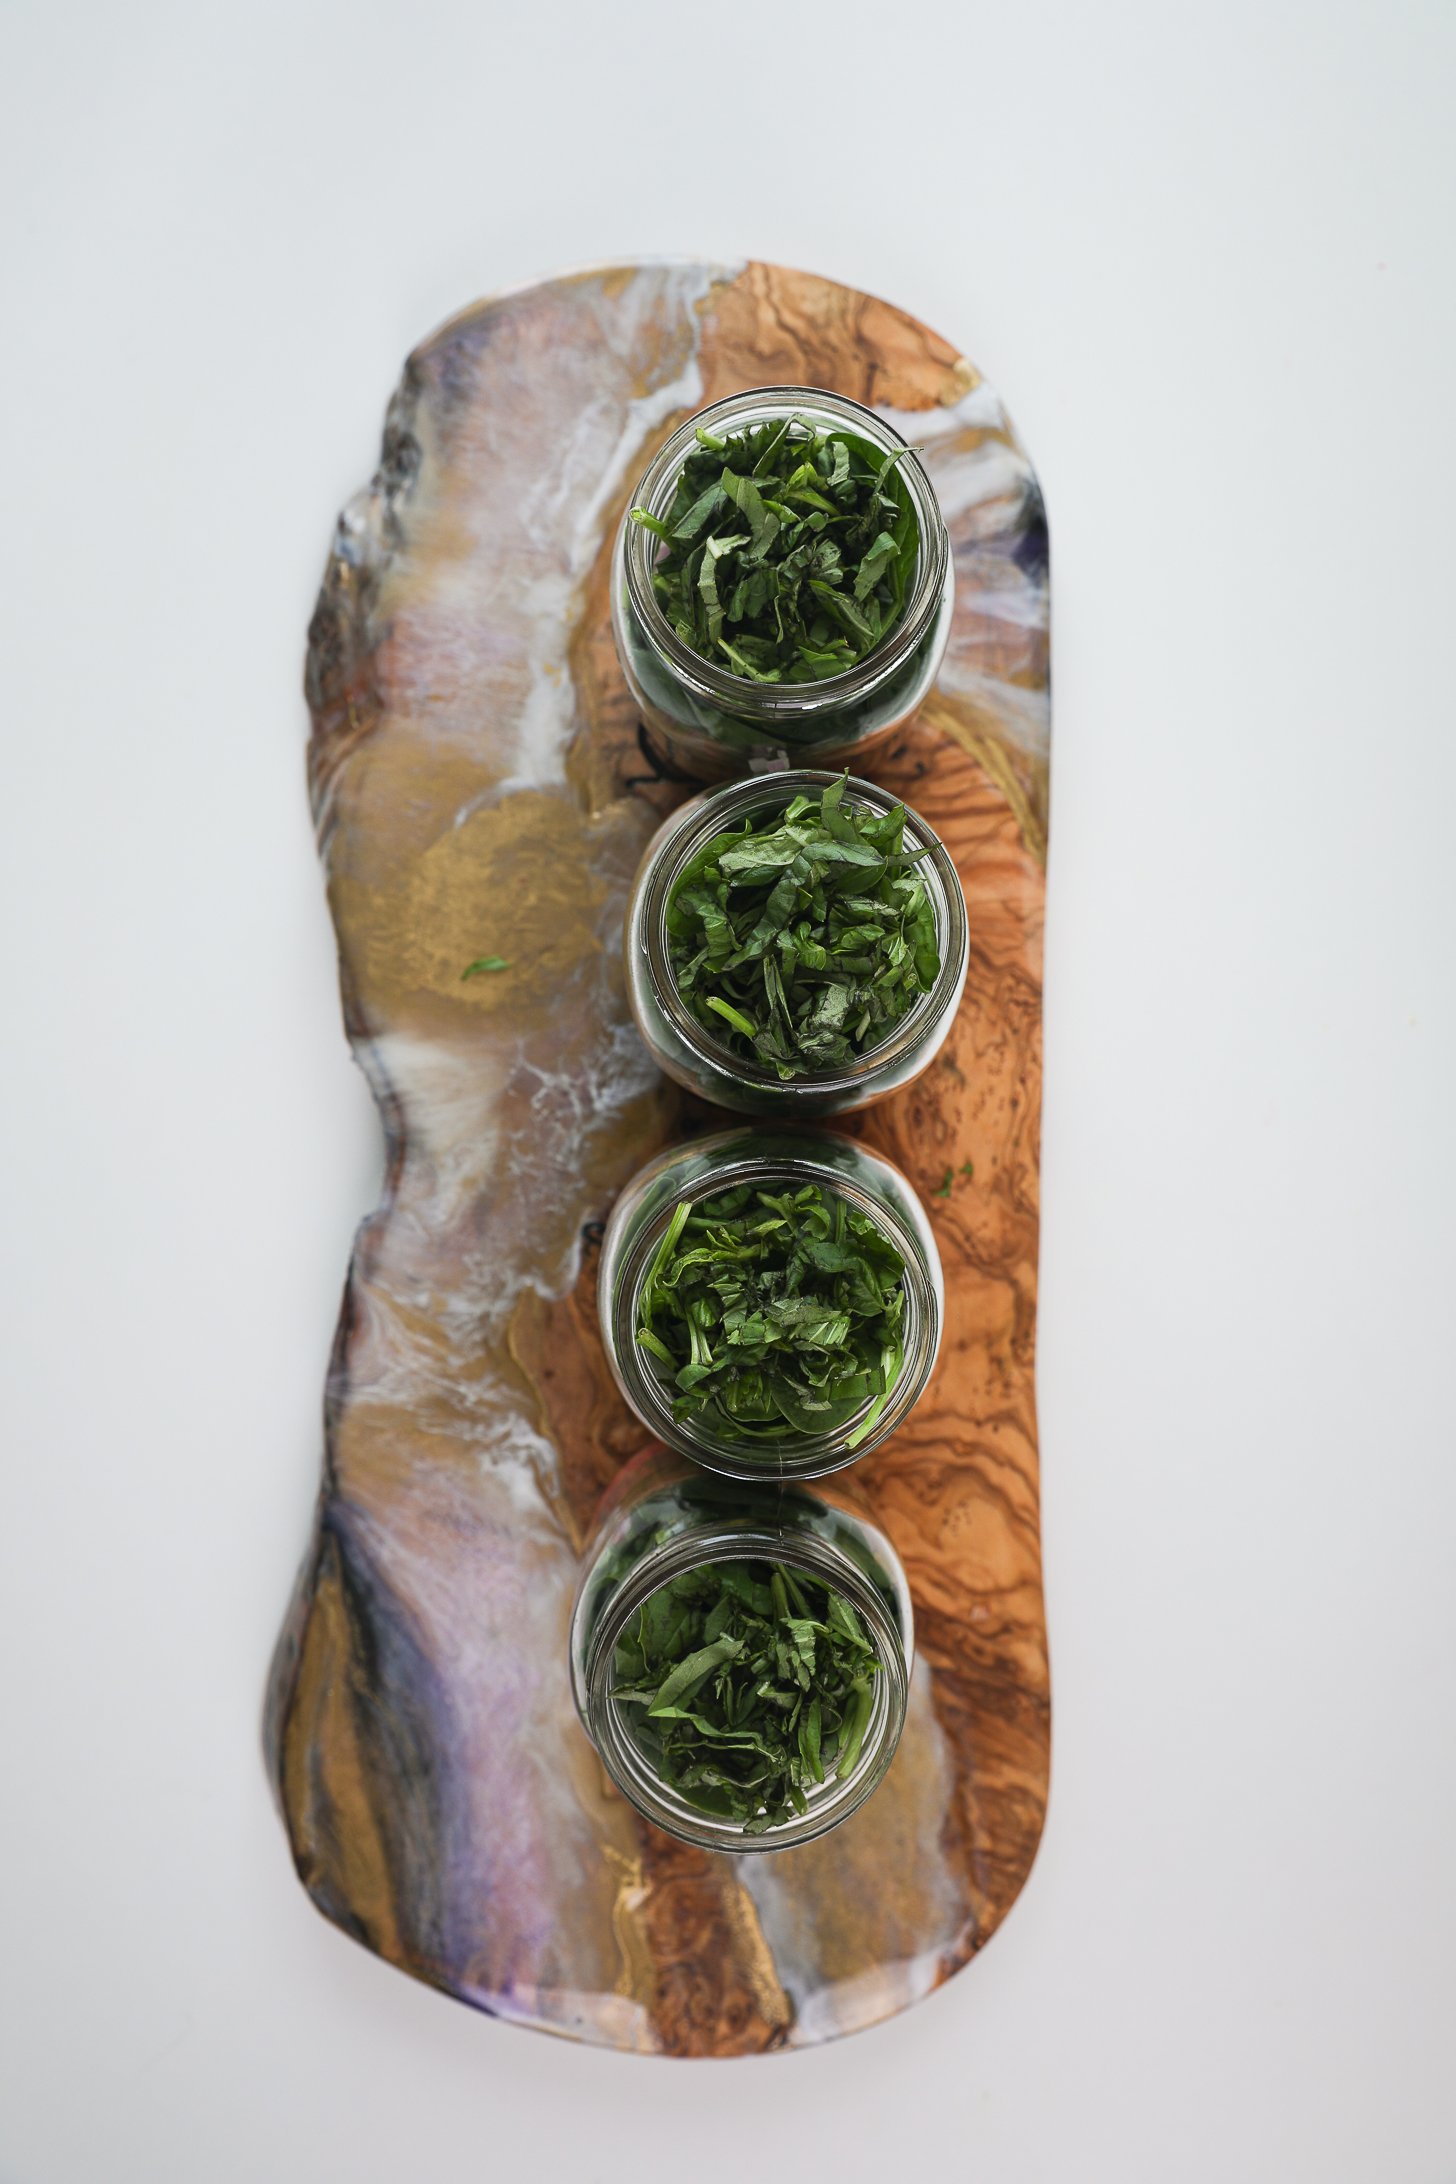 Four mason jars lined up and filled to the rim with chopped greens and basil placed on a long wooden board.